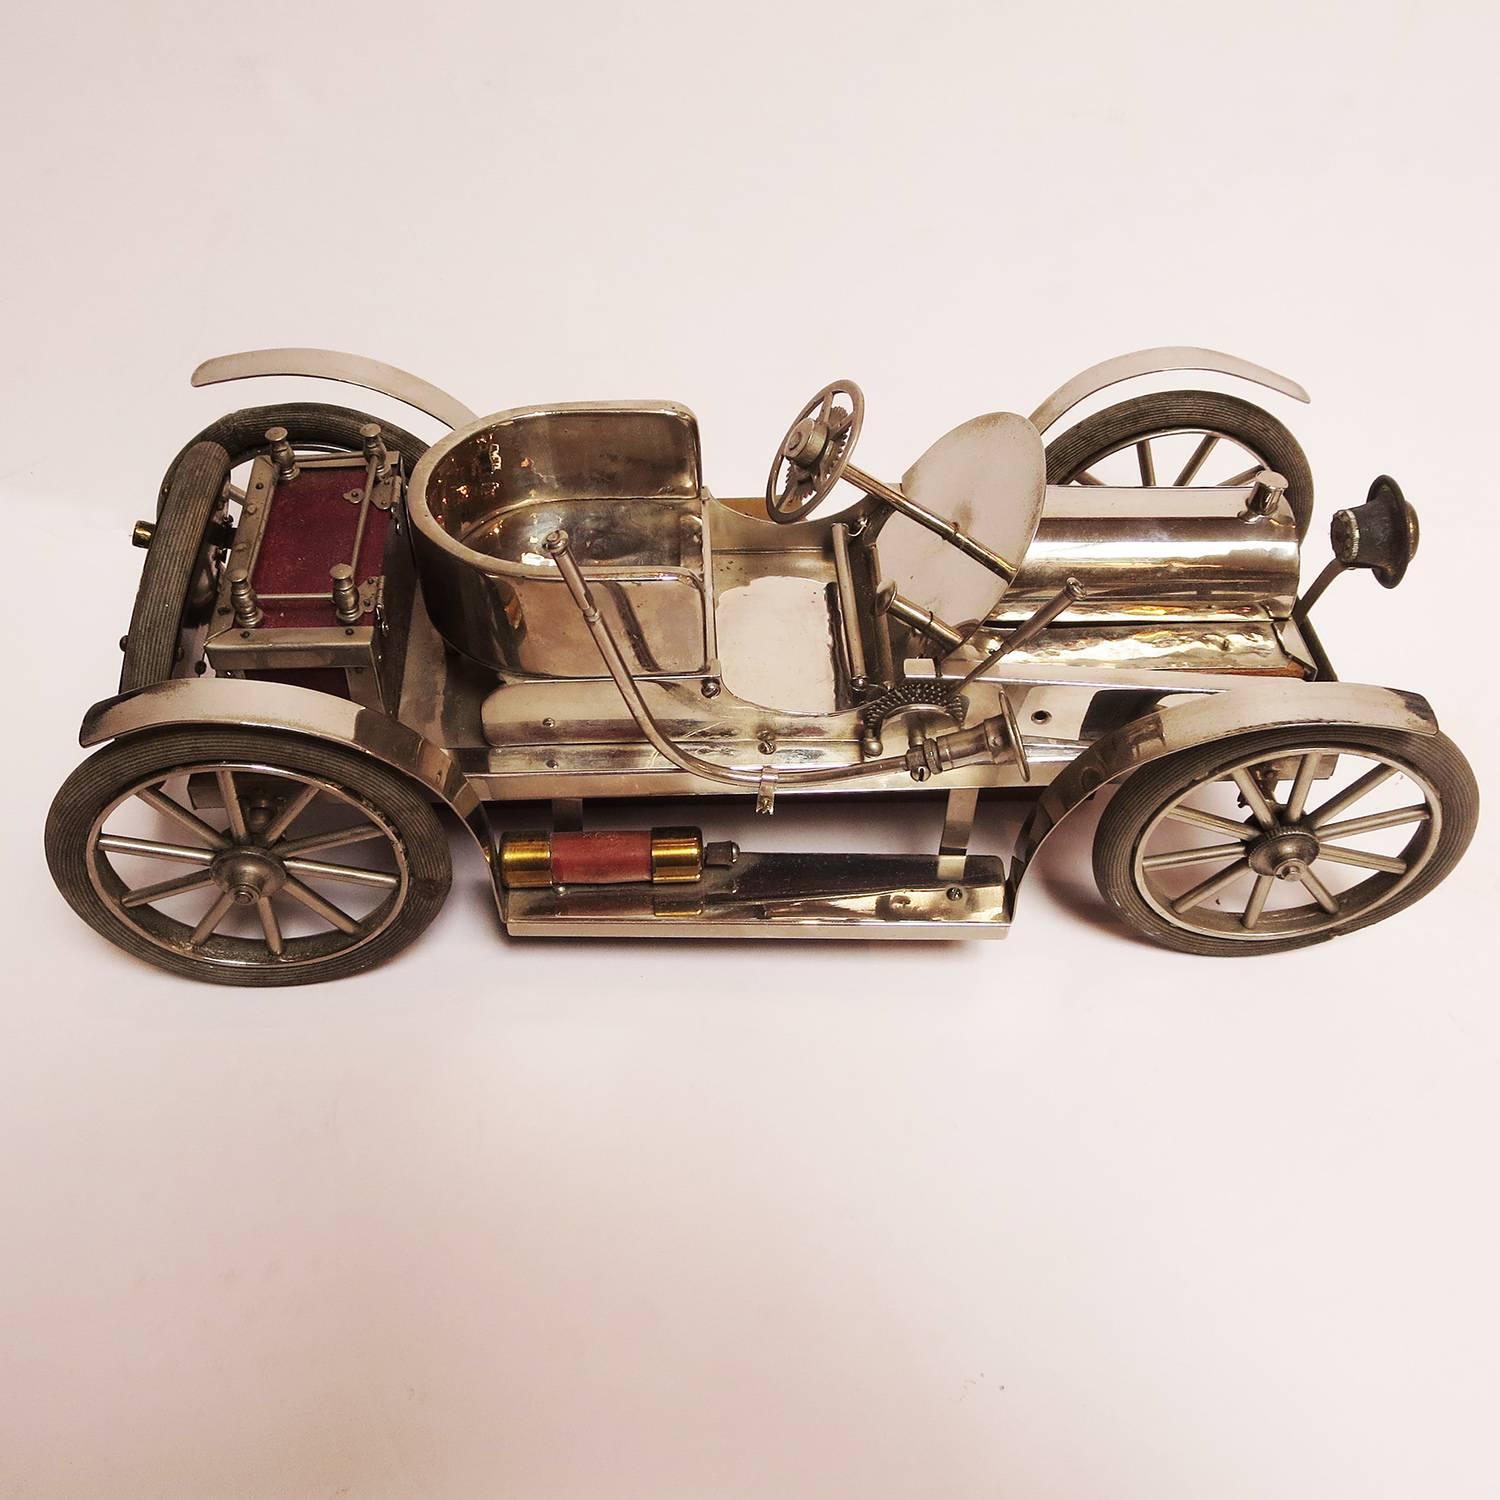 This fantastic desk top car model represents a circa 1910 early automobile, although it is unknown when this example was built. The model is greatly detailed and well-constructed. All metals are "German silver" plate over brass, as well as